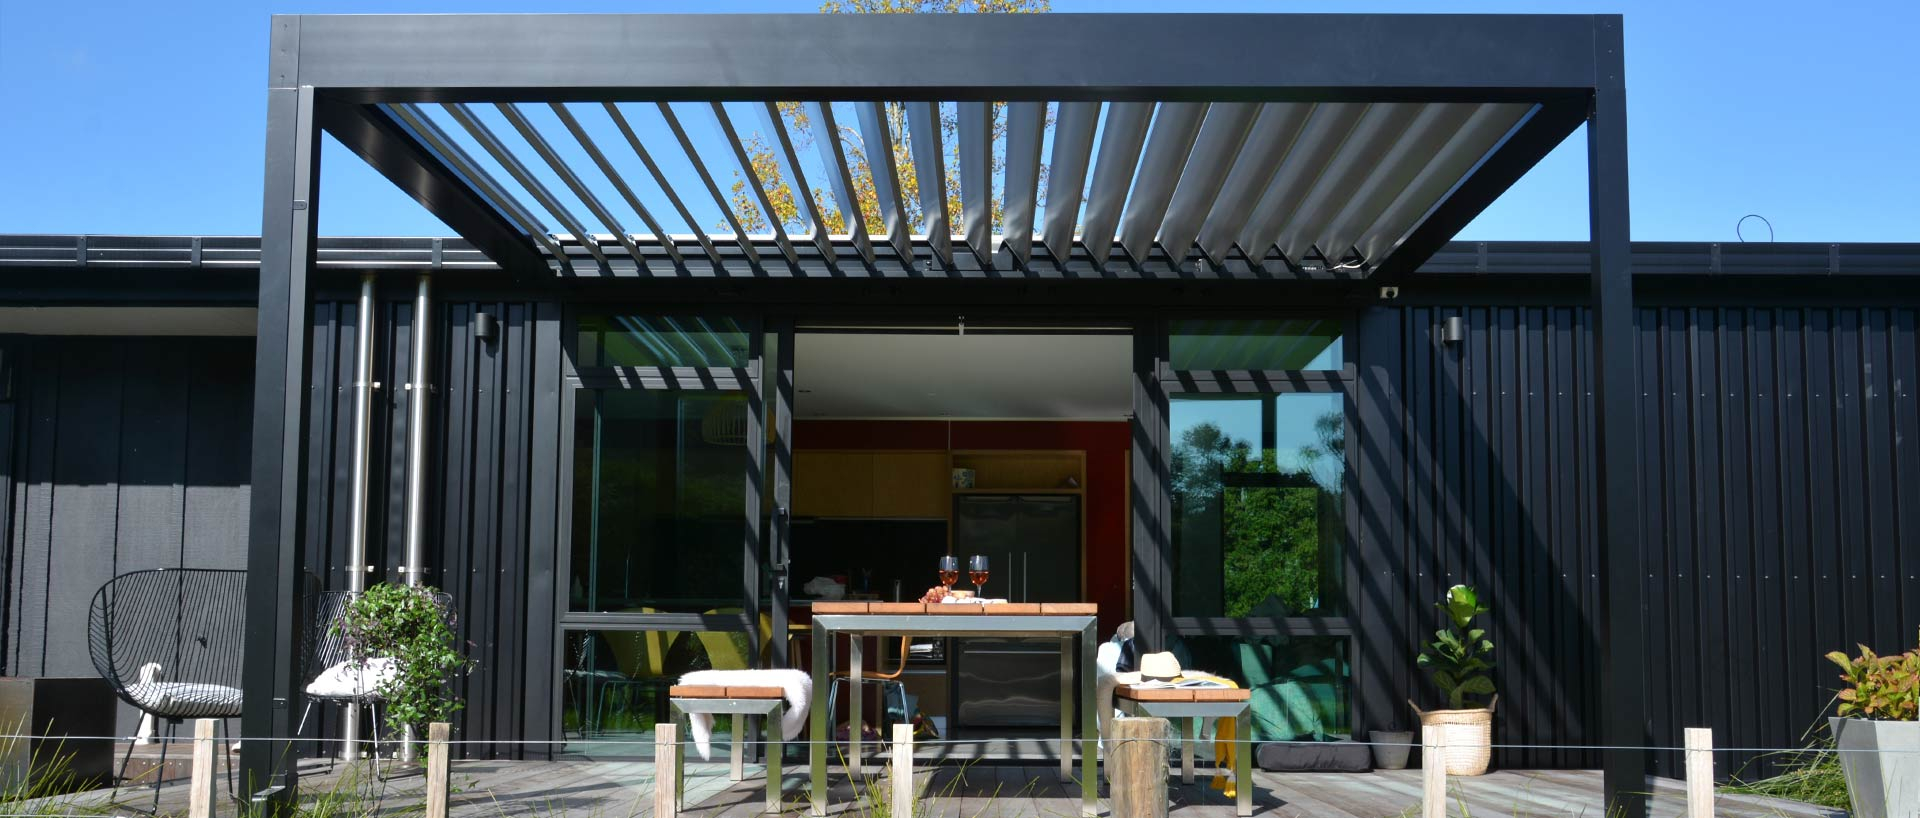 Pergolas Louvre Roofs And Outdoor Blinds Whangarei Northland regarding dimensions 1920 X 818